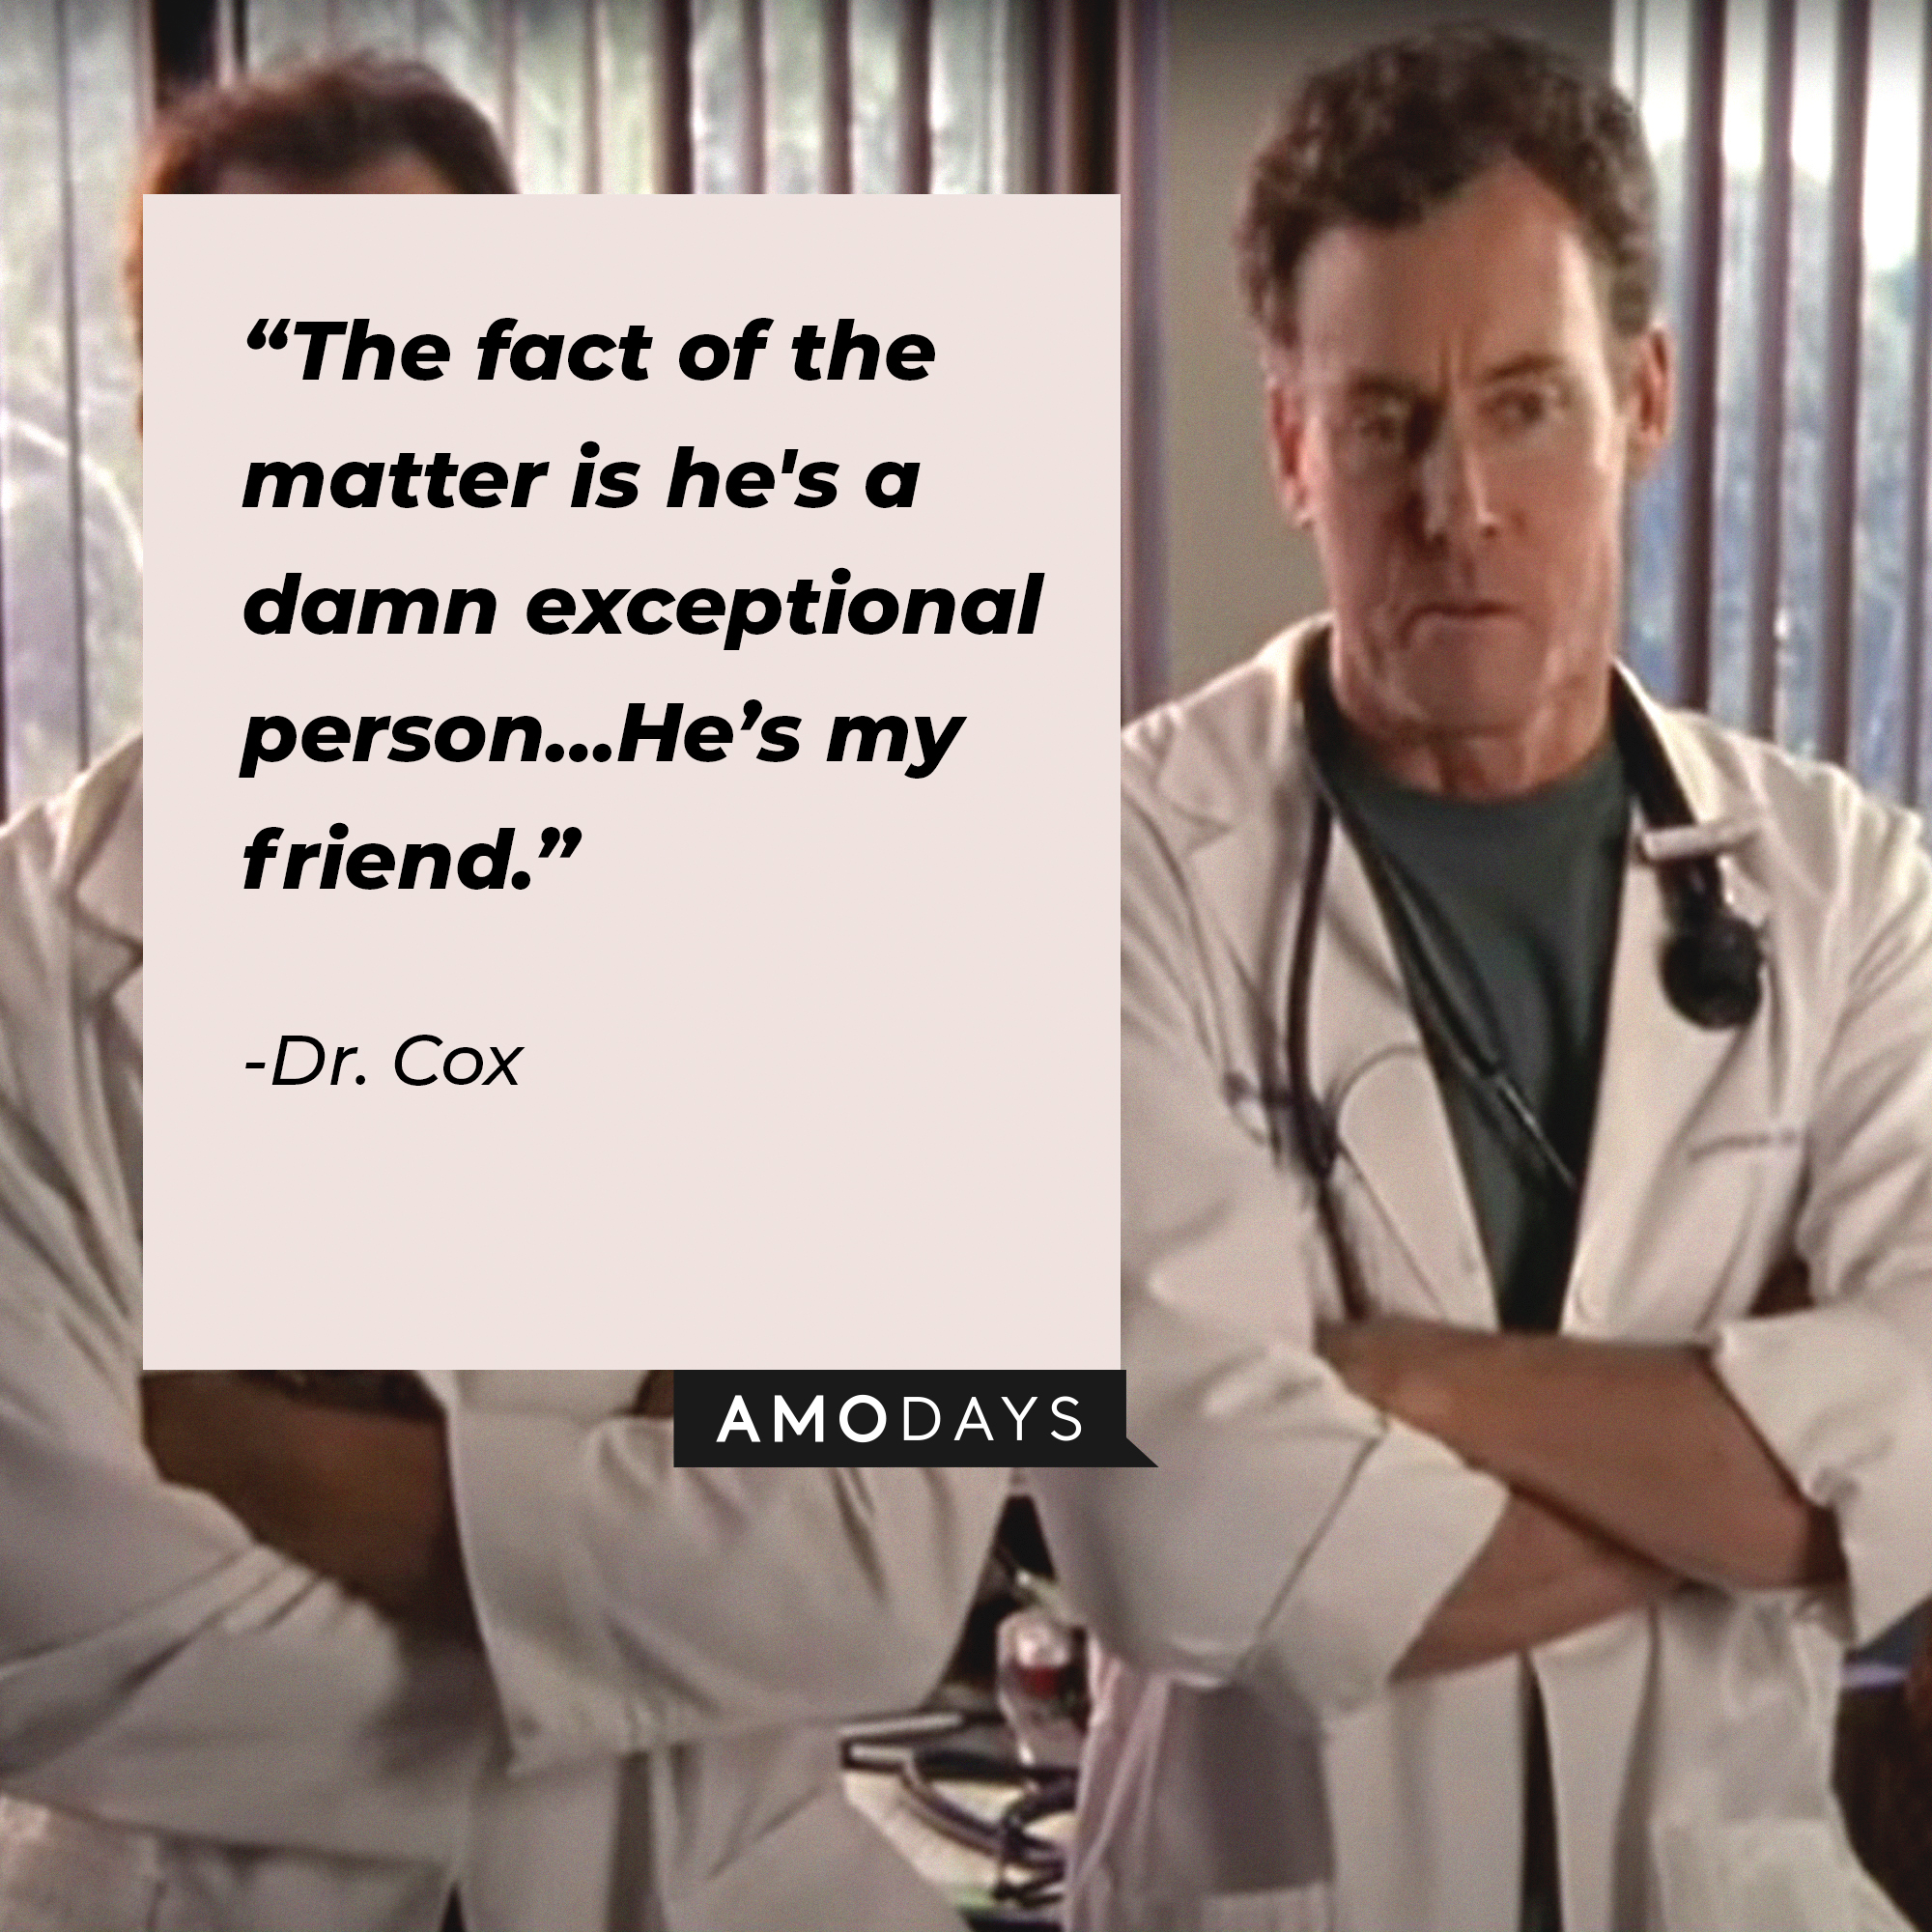 Dr. Cox, with his quote: "The fact of the matter is he's a damn exceptional person…He’s my friend.” | Source: facebook.com/scrubs